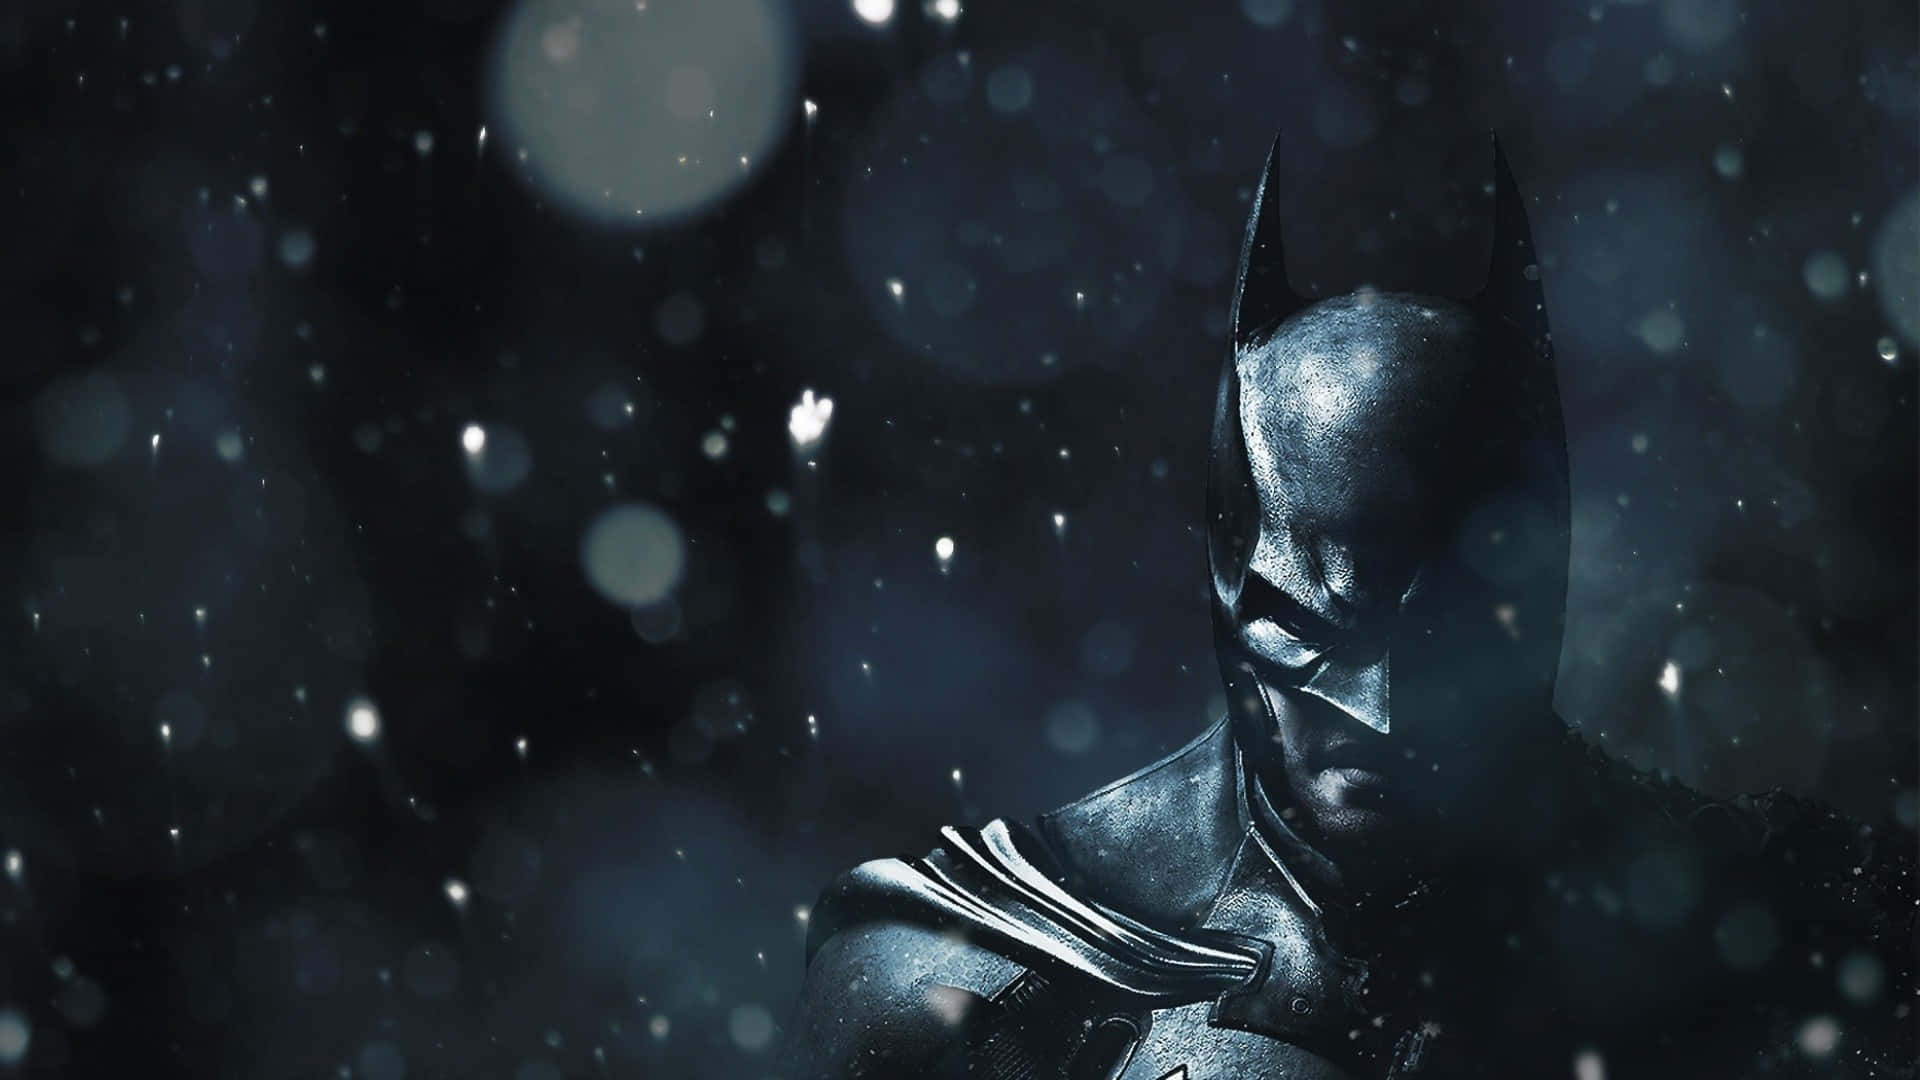 Bruce Wayne in a Thoughtful Moment Wallpaper